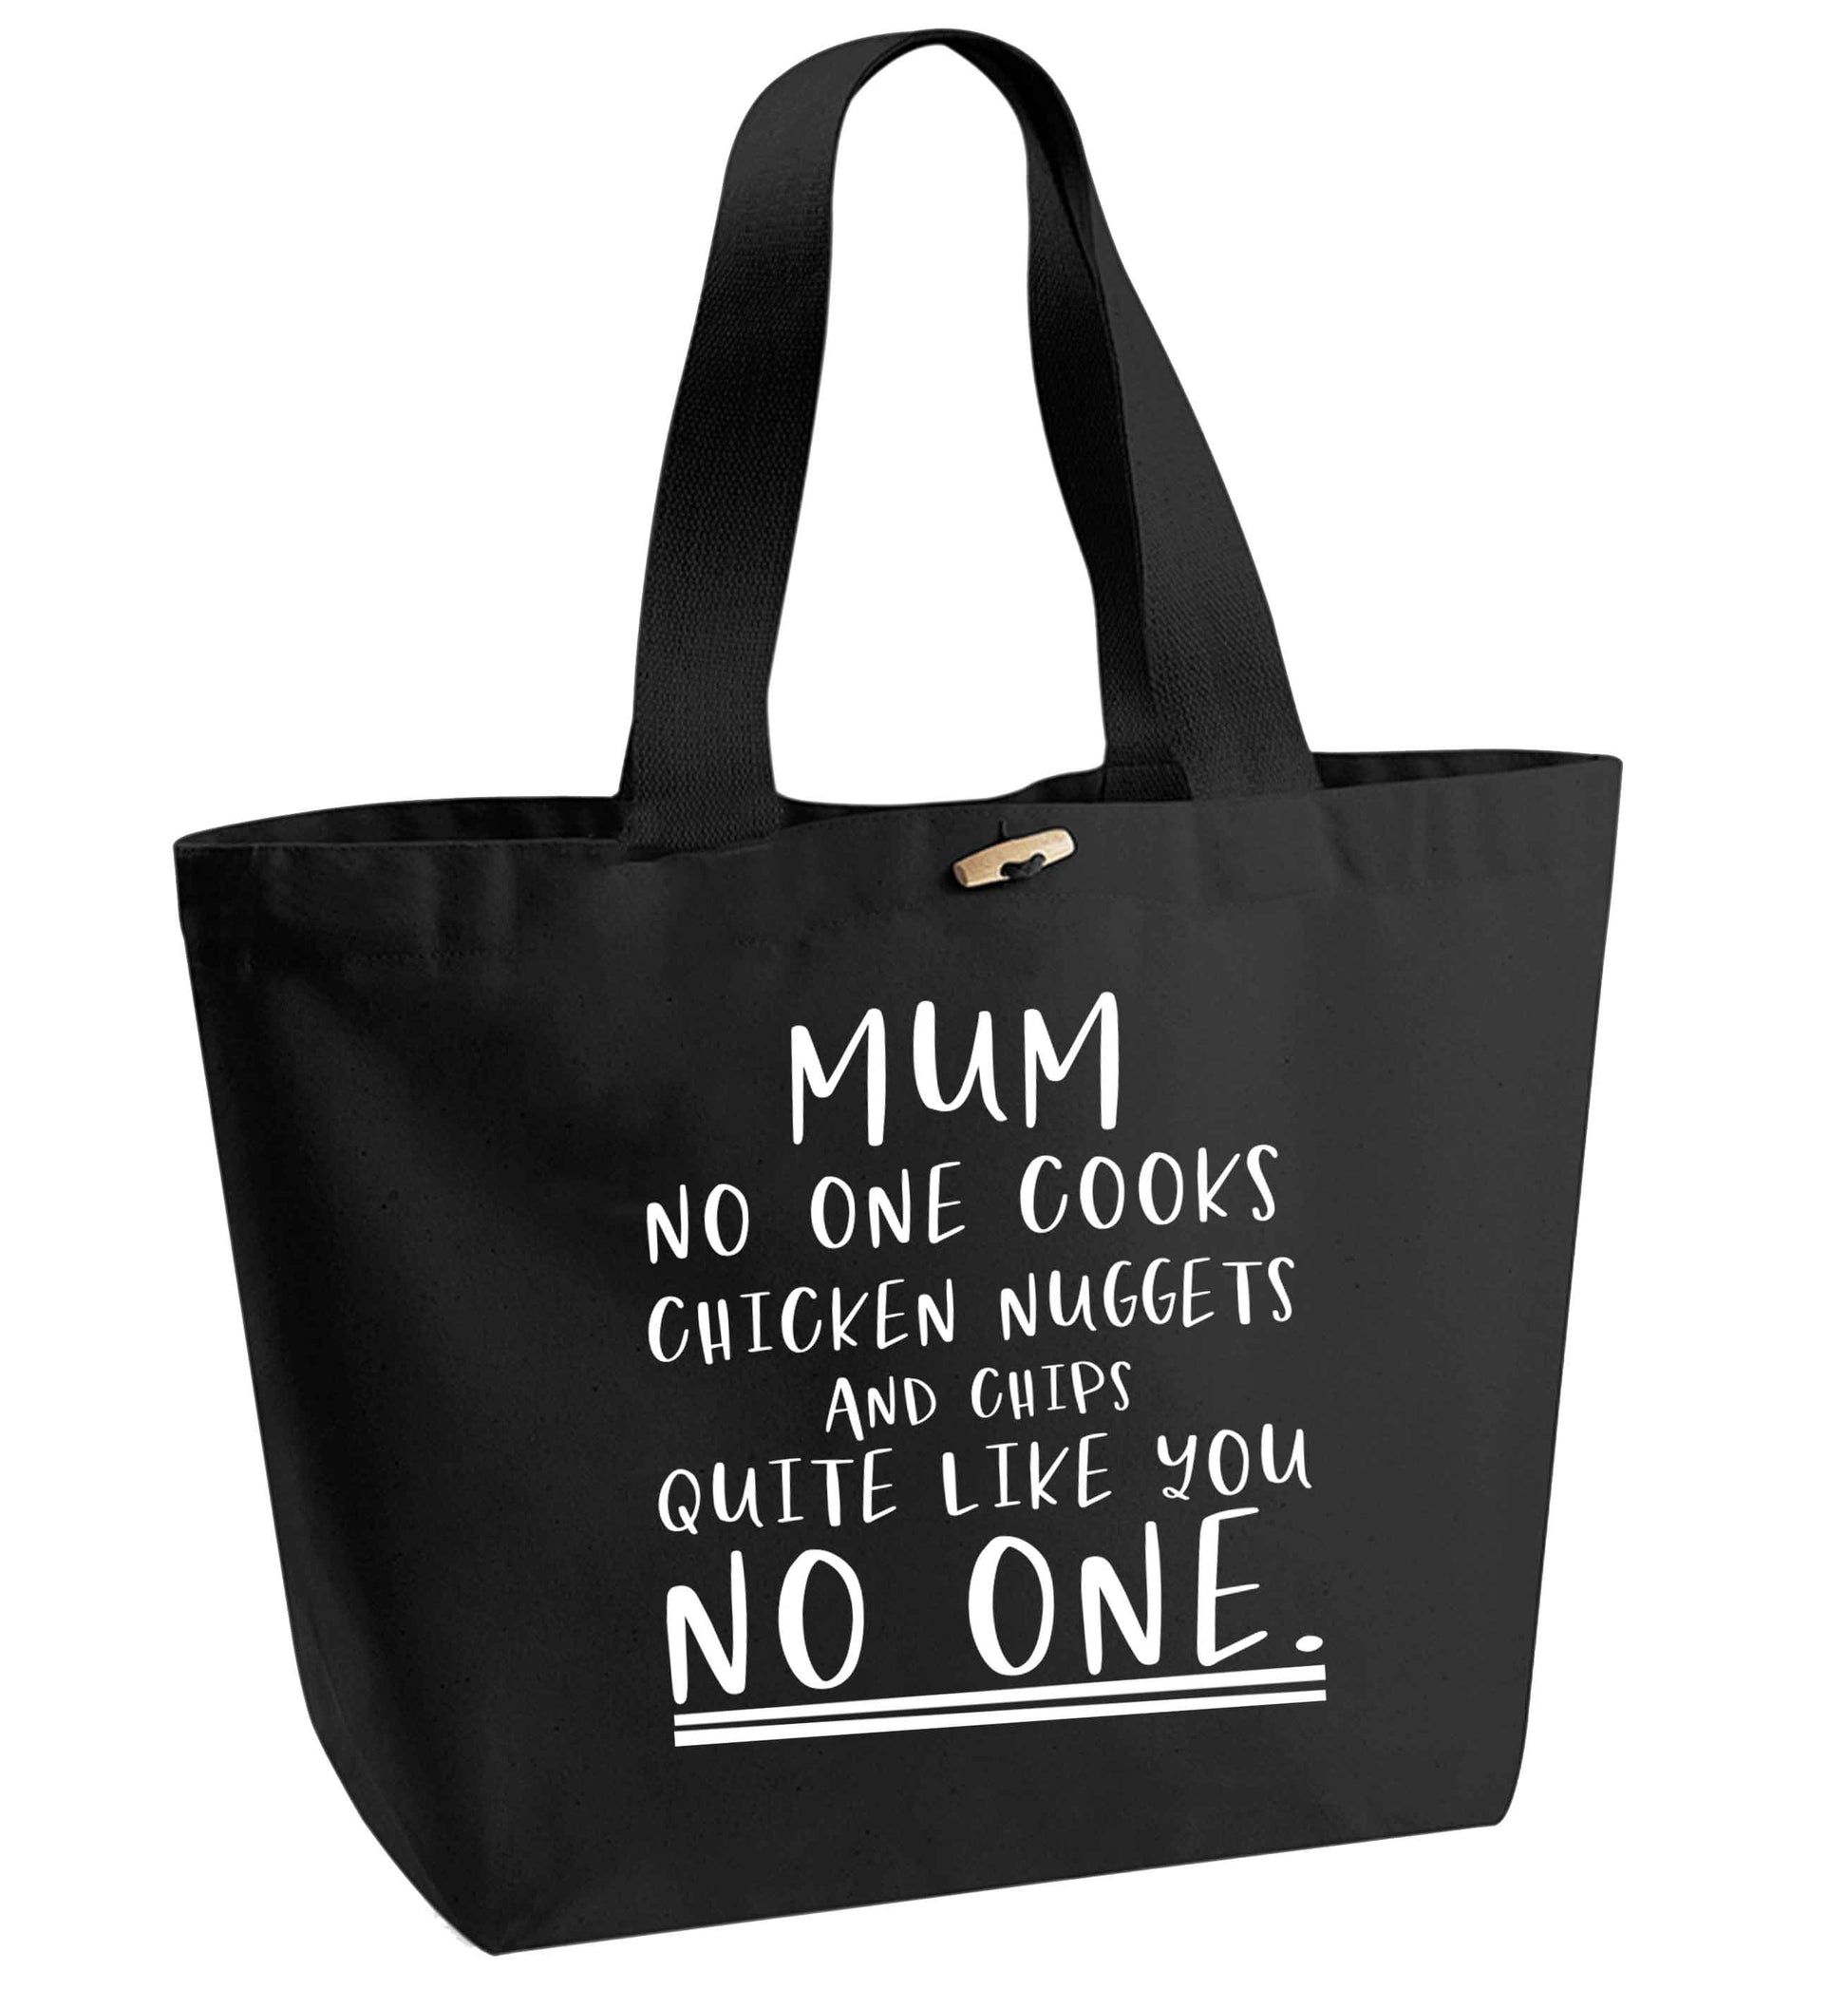 Super funny sassy gift for mother's day or birthday!  Mum no one cooks chicken nuggets and chips like you no one organic cotton premium tote bag with wooden toggle in black